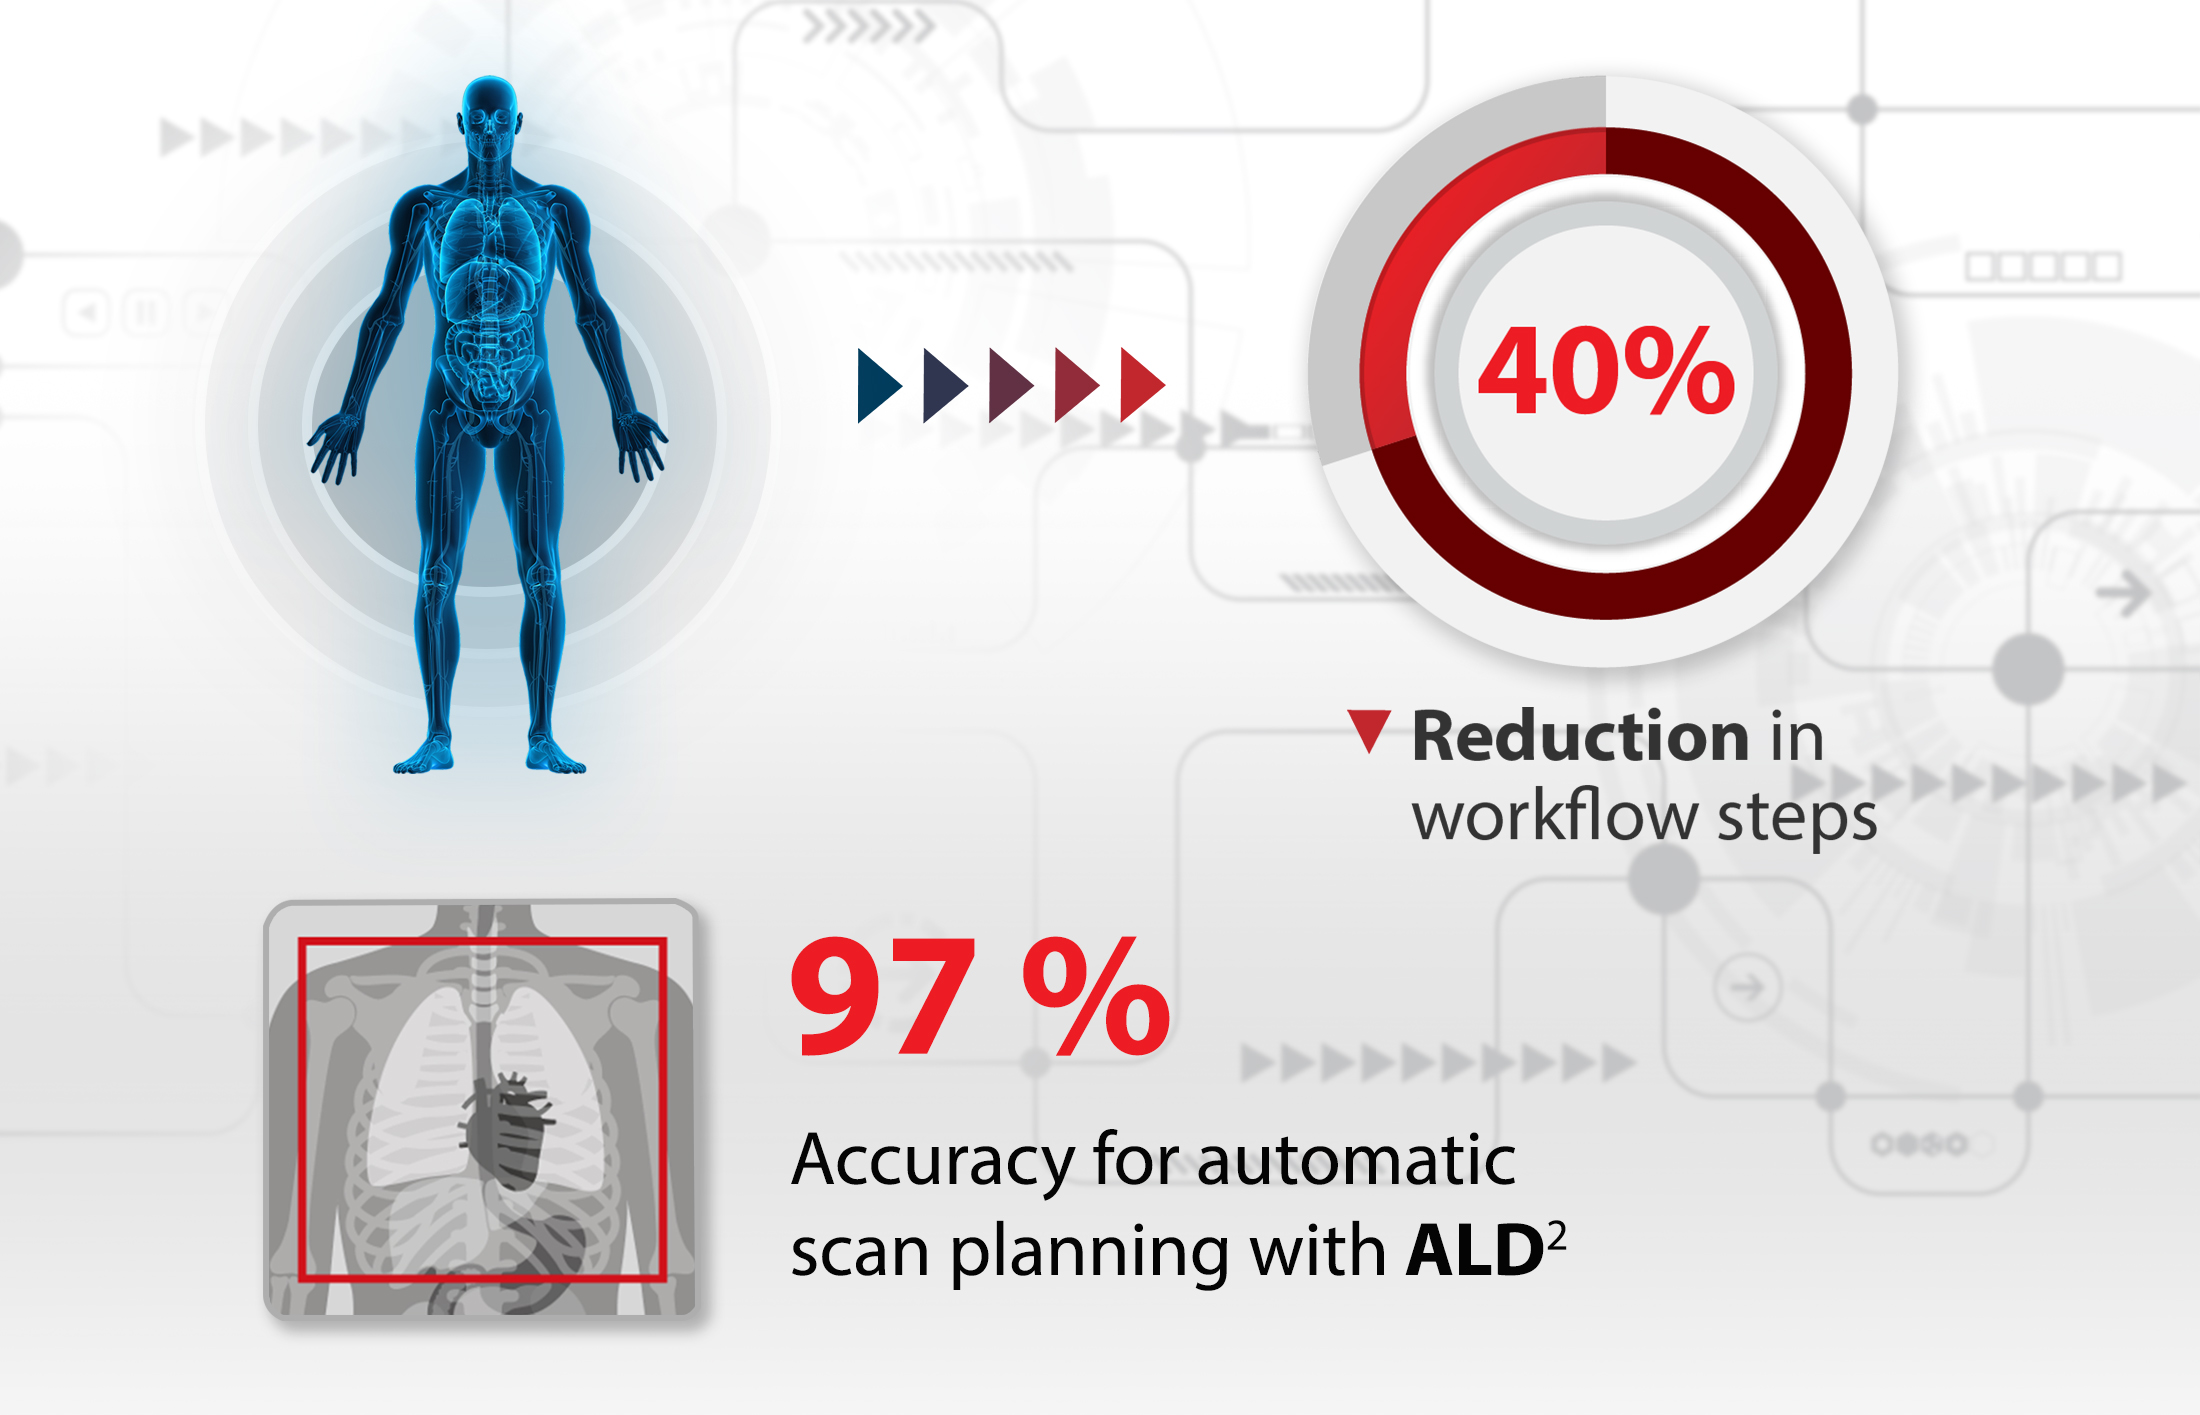 40% Reduction in workflow steps / 97% Accuracy for automatic scan planning with ALD